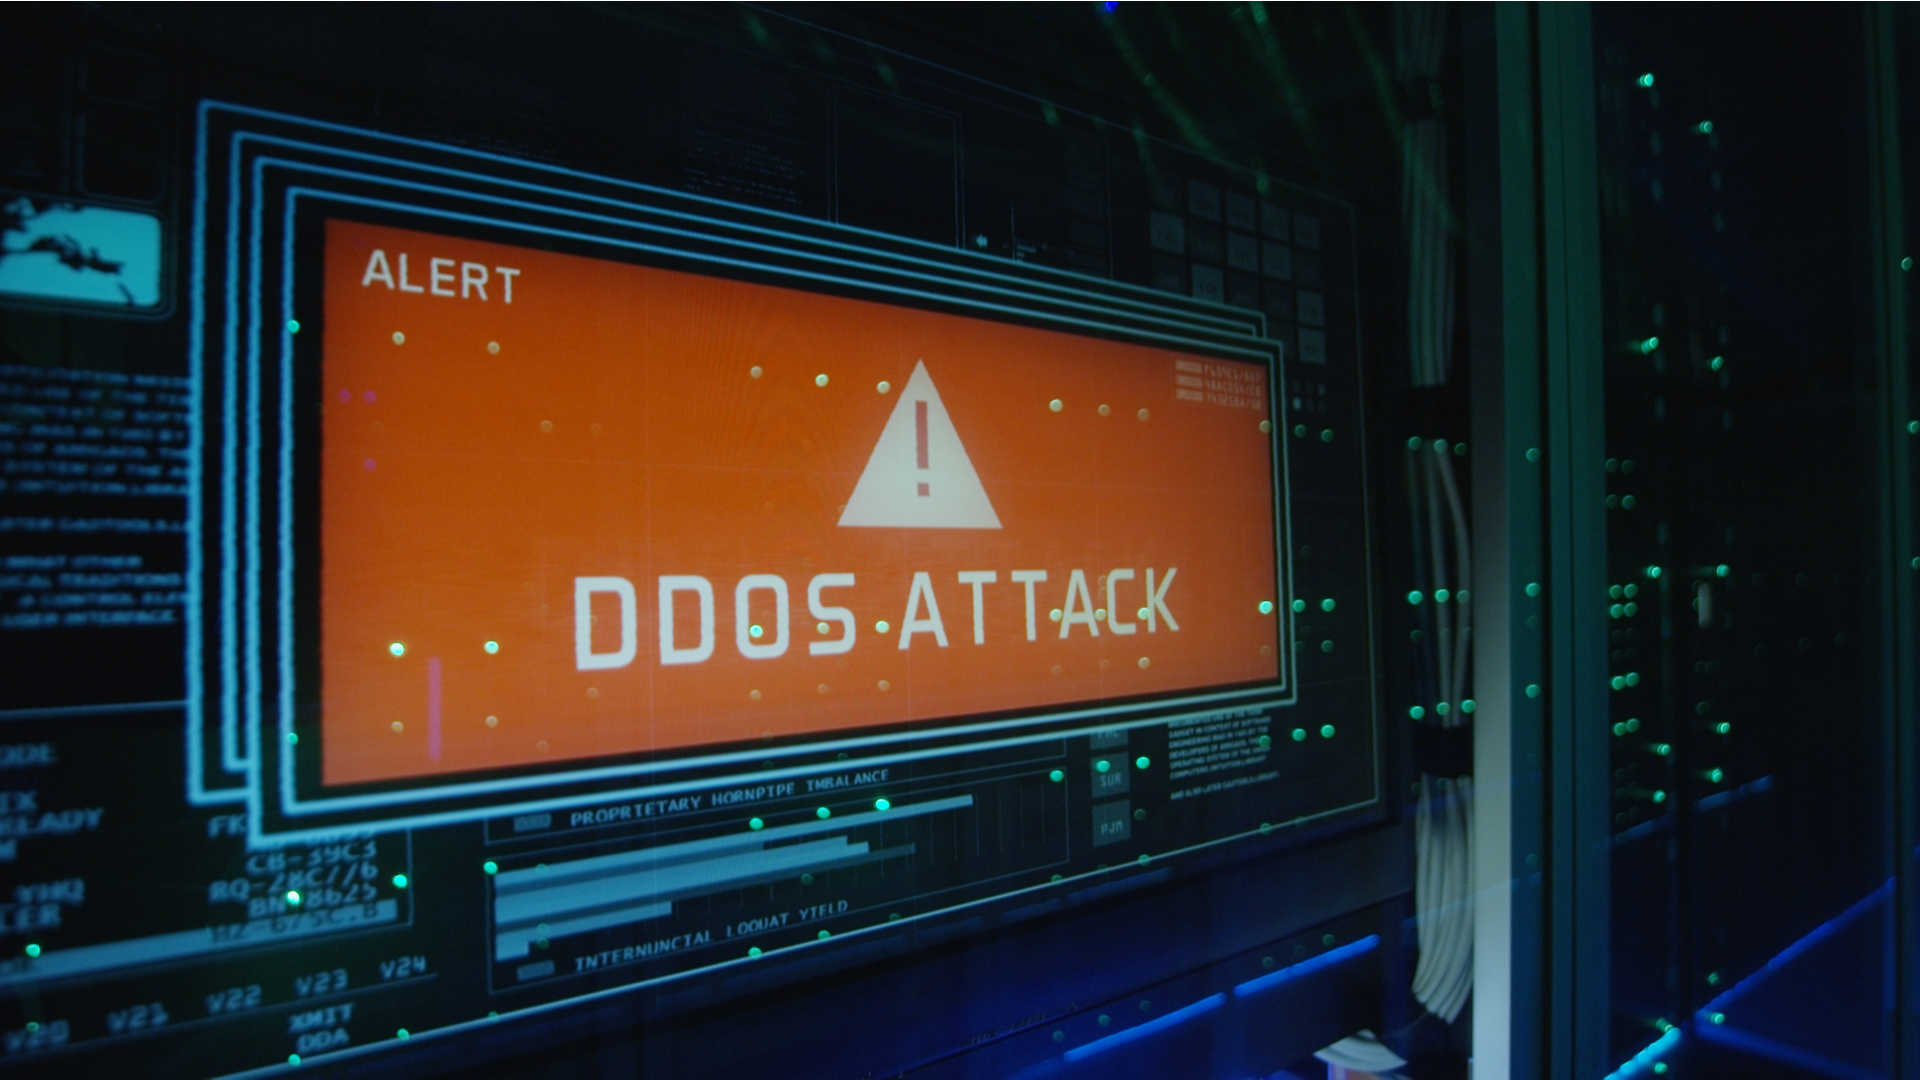 DDoS attacks are getting bigger and more powerful, and that's a really bad thing